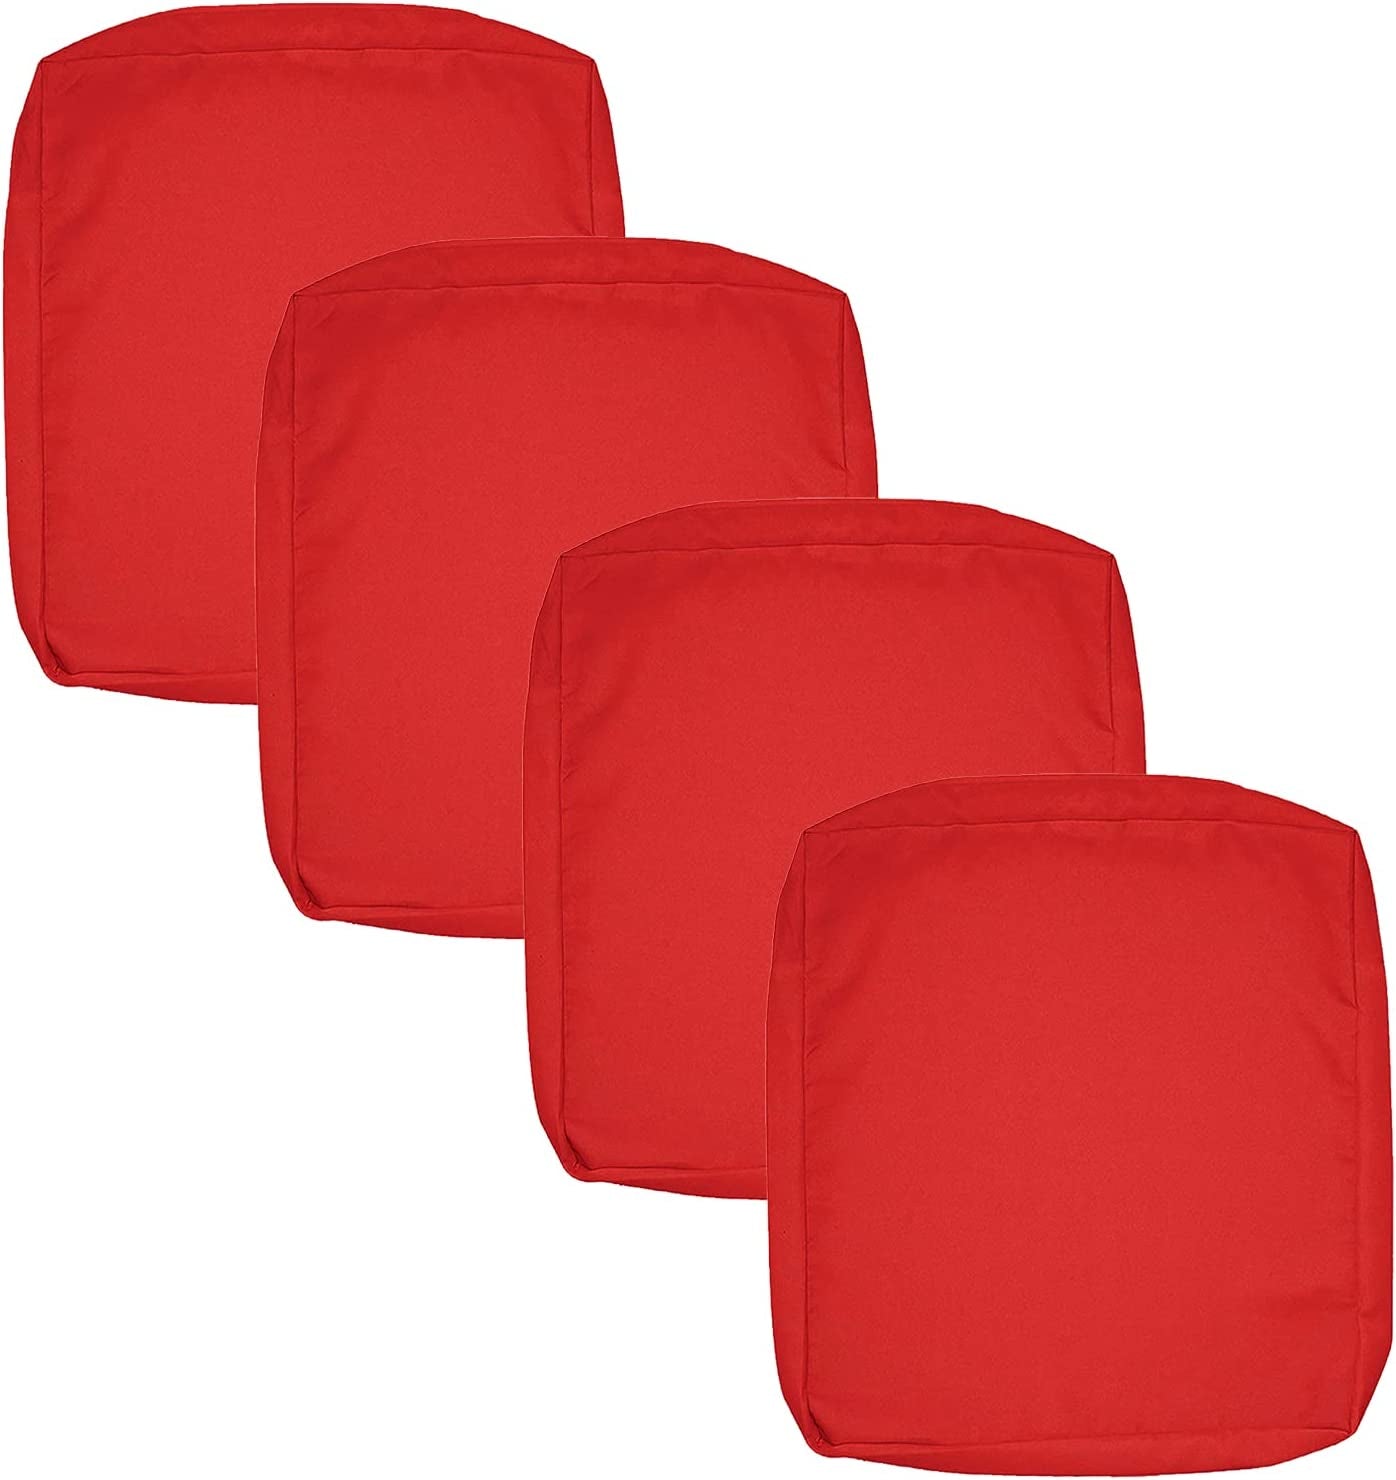 FLYMEI, FLYMEI Outdoor Replacement Cushion Covers, Patio Loveseat Cushion Covers, Water Resistant Patio Cushion Covers 24'' X 24'' X 4'', Red Outdoor Christmas Decorations